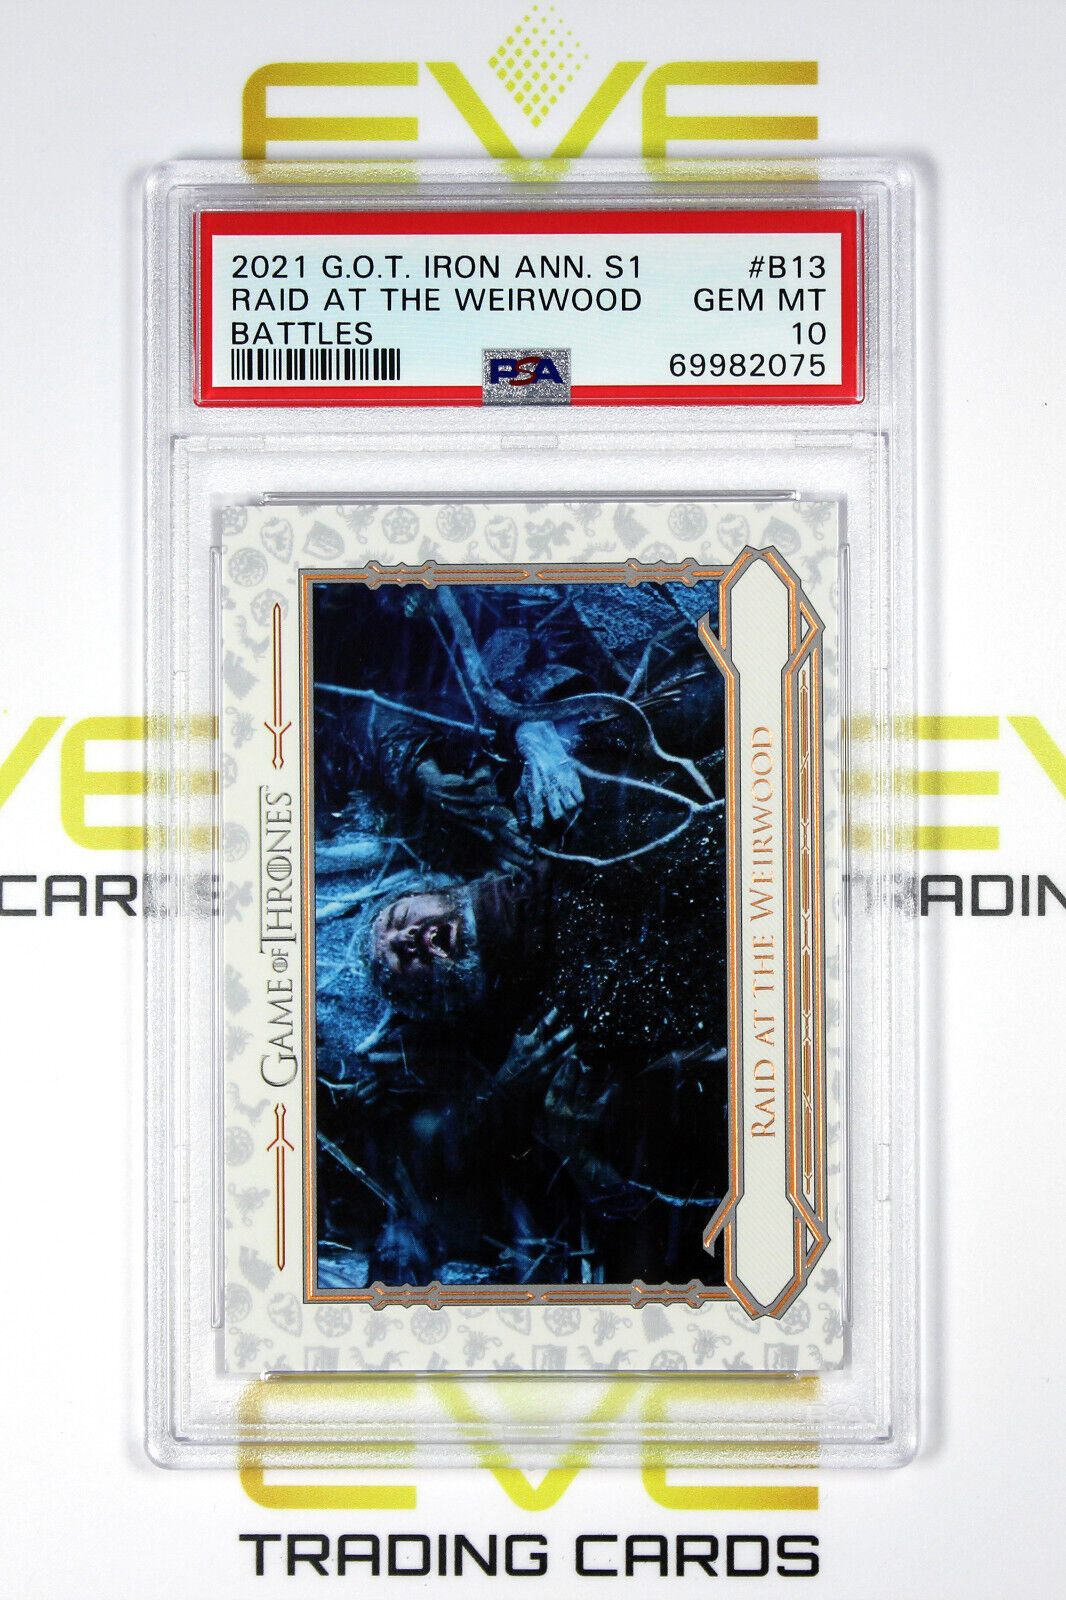 Graded Game of Thrones Card - #B13 2021 Raid at The Weirwood - Battles - PSA 10